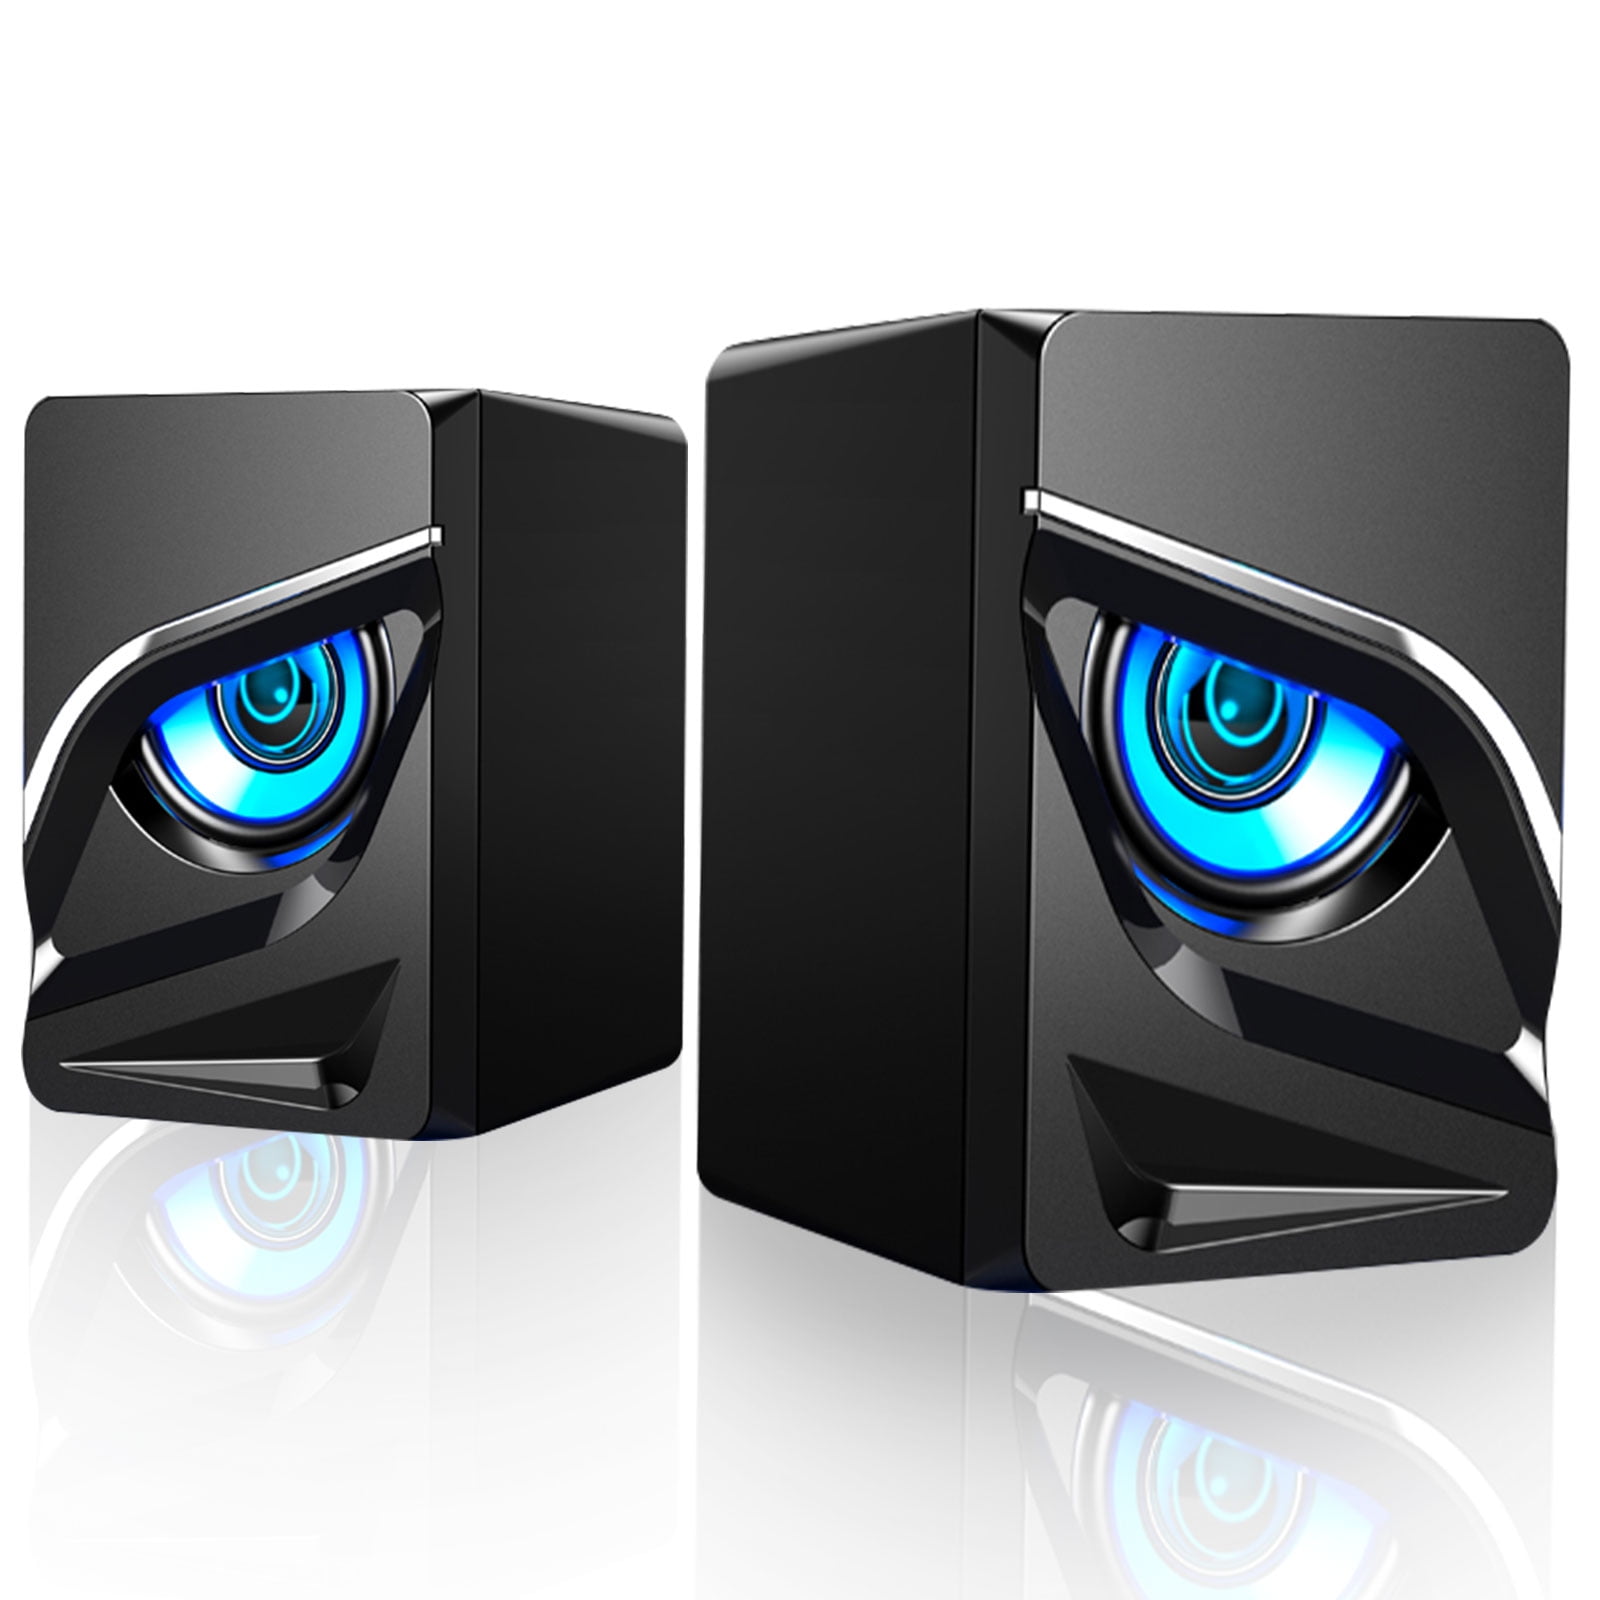 Computer Speakers 2.0 Channel, USB Powered LED Multimedia Speakers w